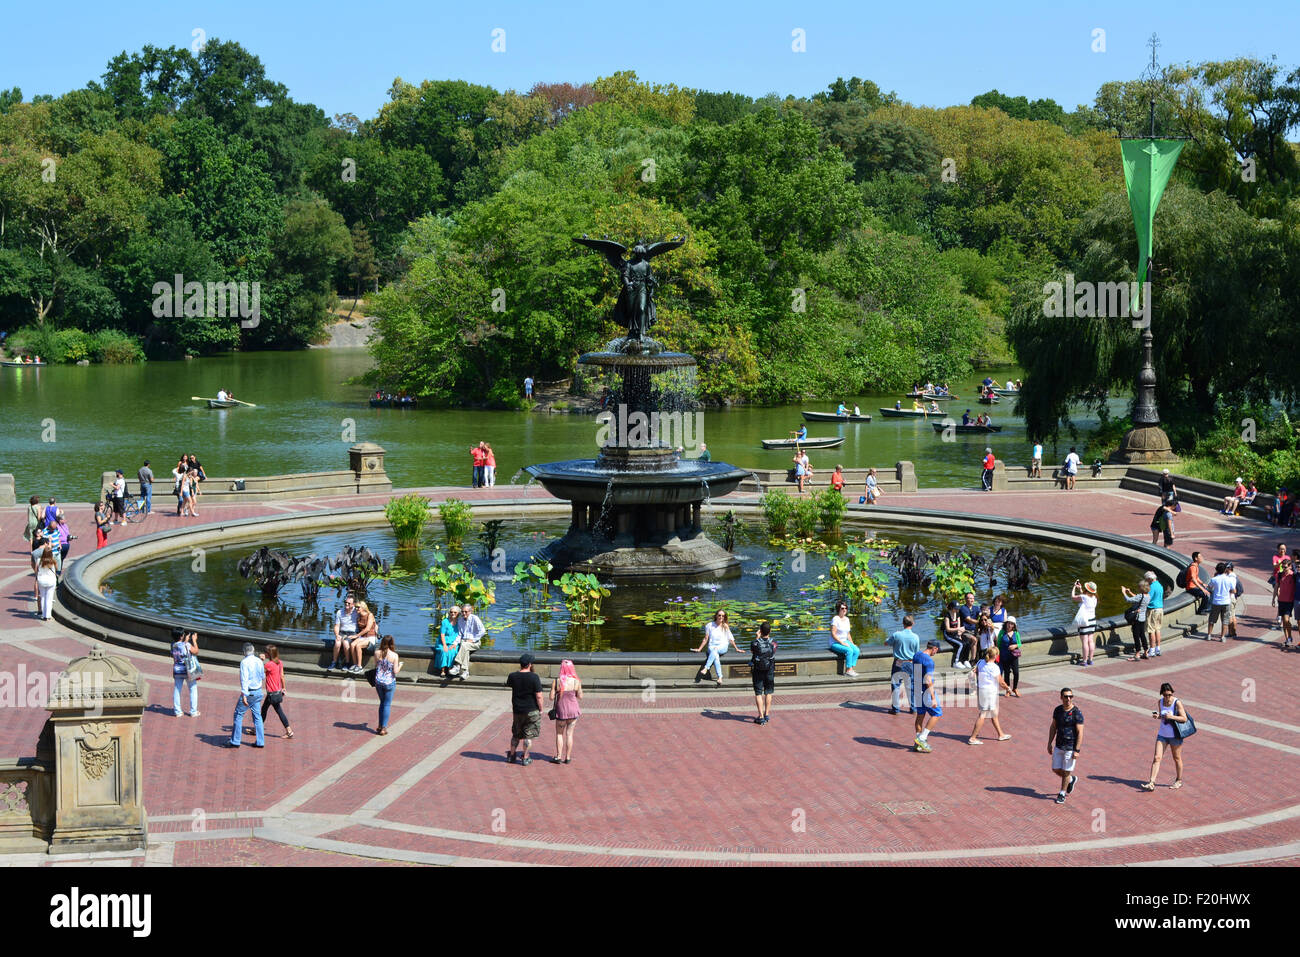 People enjoying a summer day at Bethesda Terrace in Central Park. Stock Photo